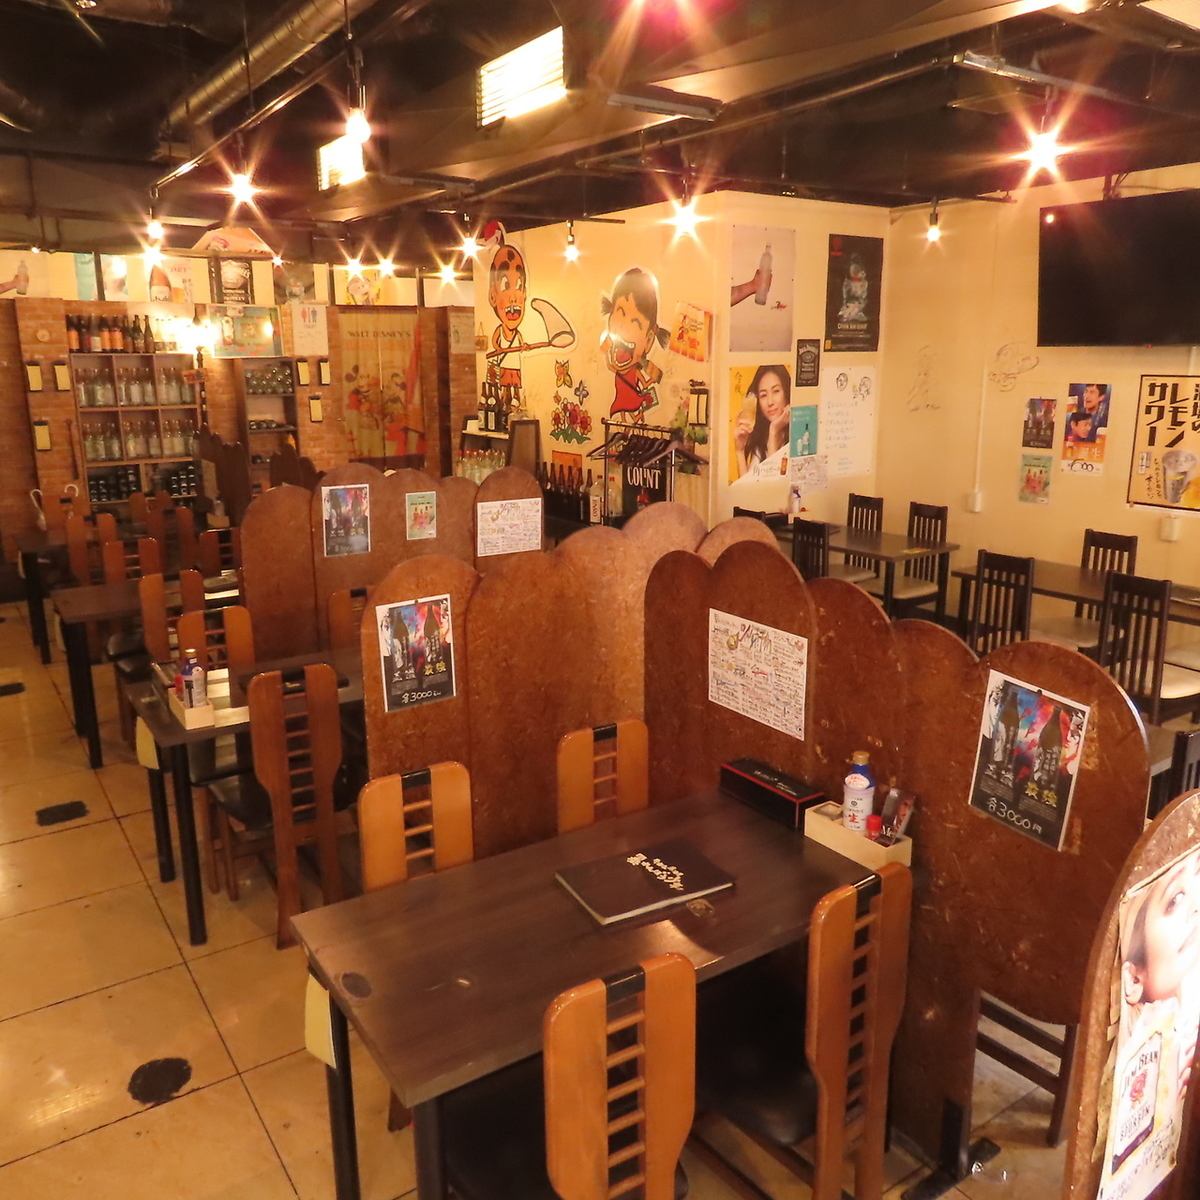 The restaurant can be reserved for private use for groups of 20 to 50 people.